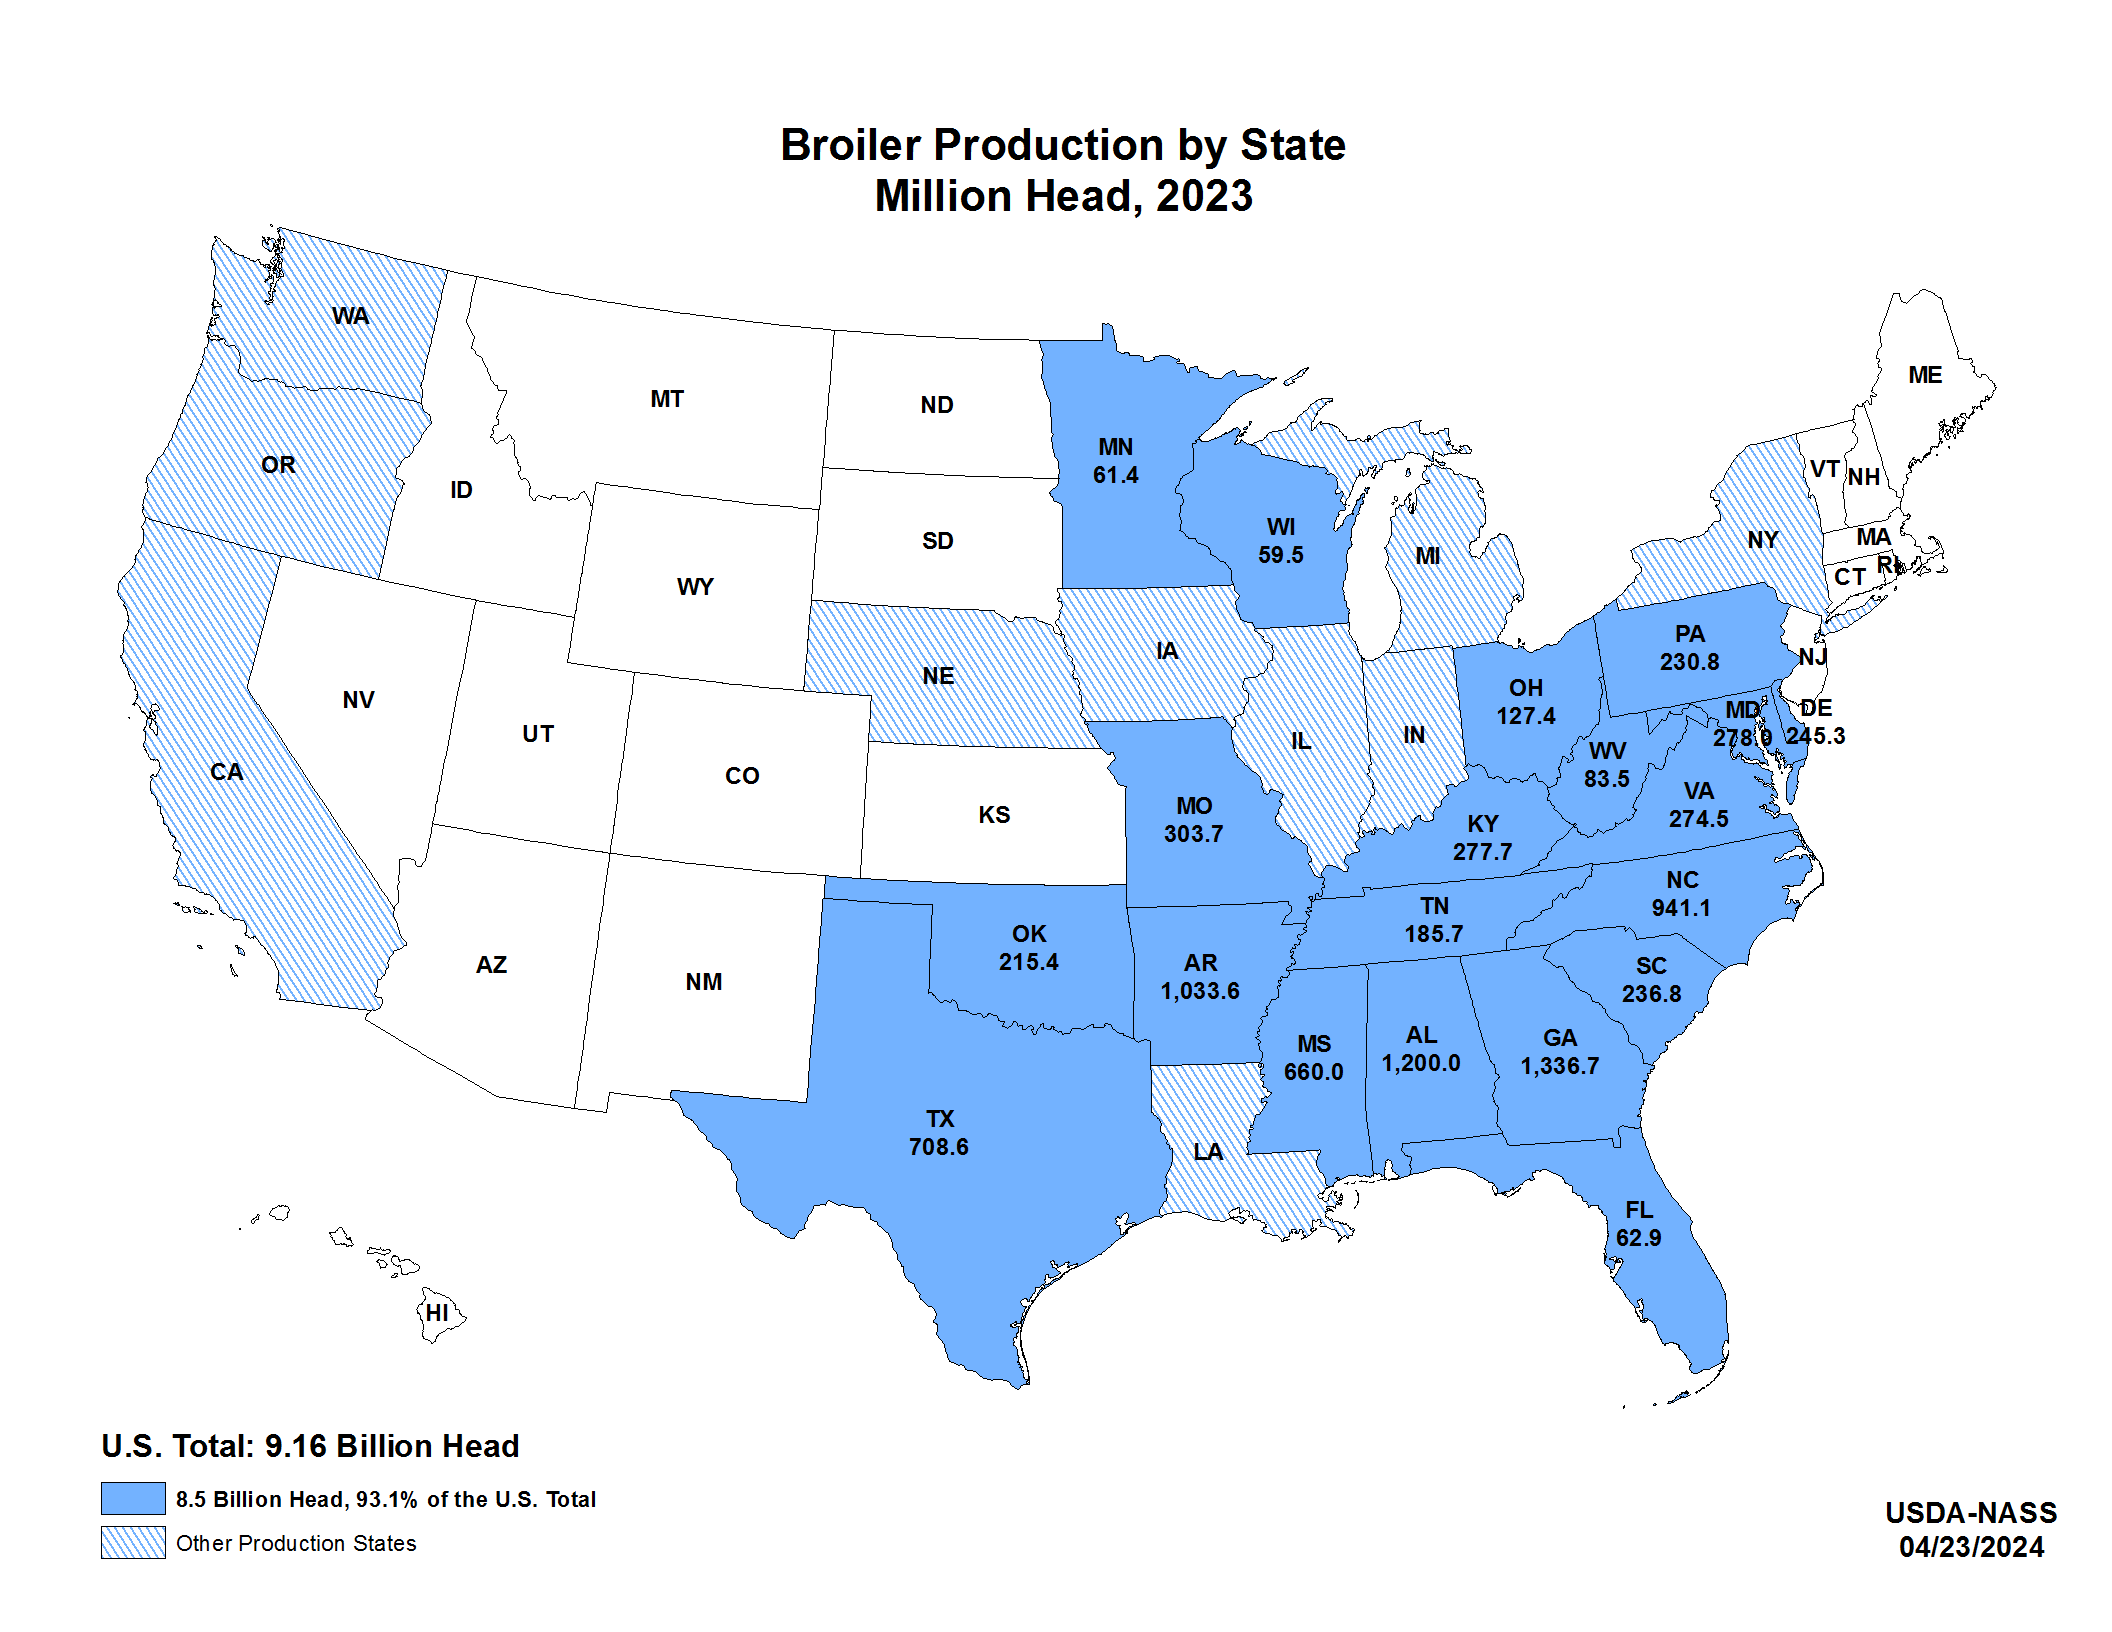 Broilers: Inventory by State, US